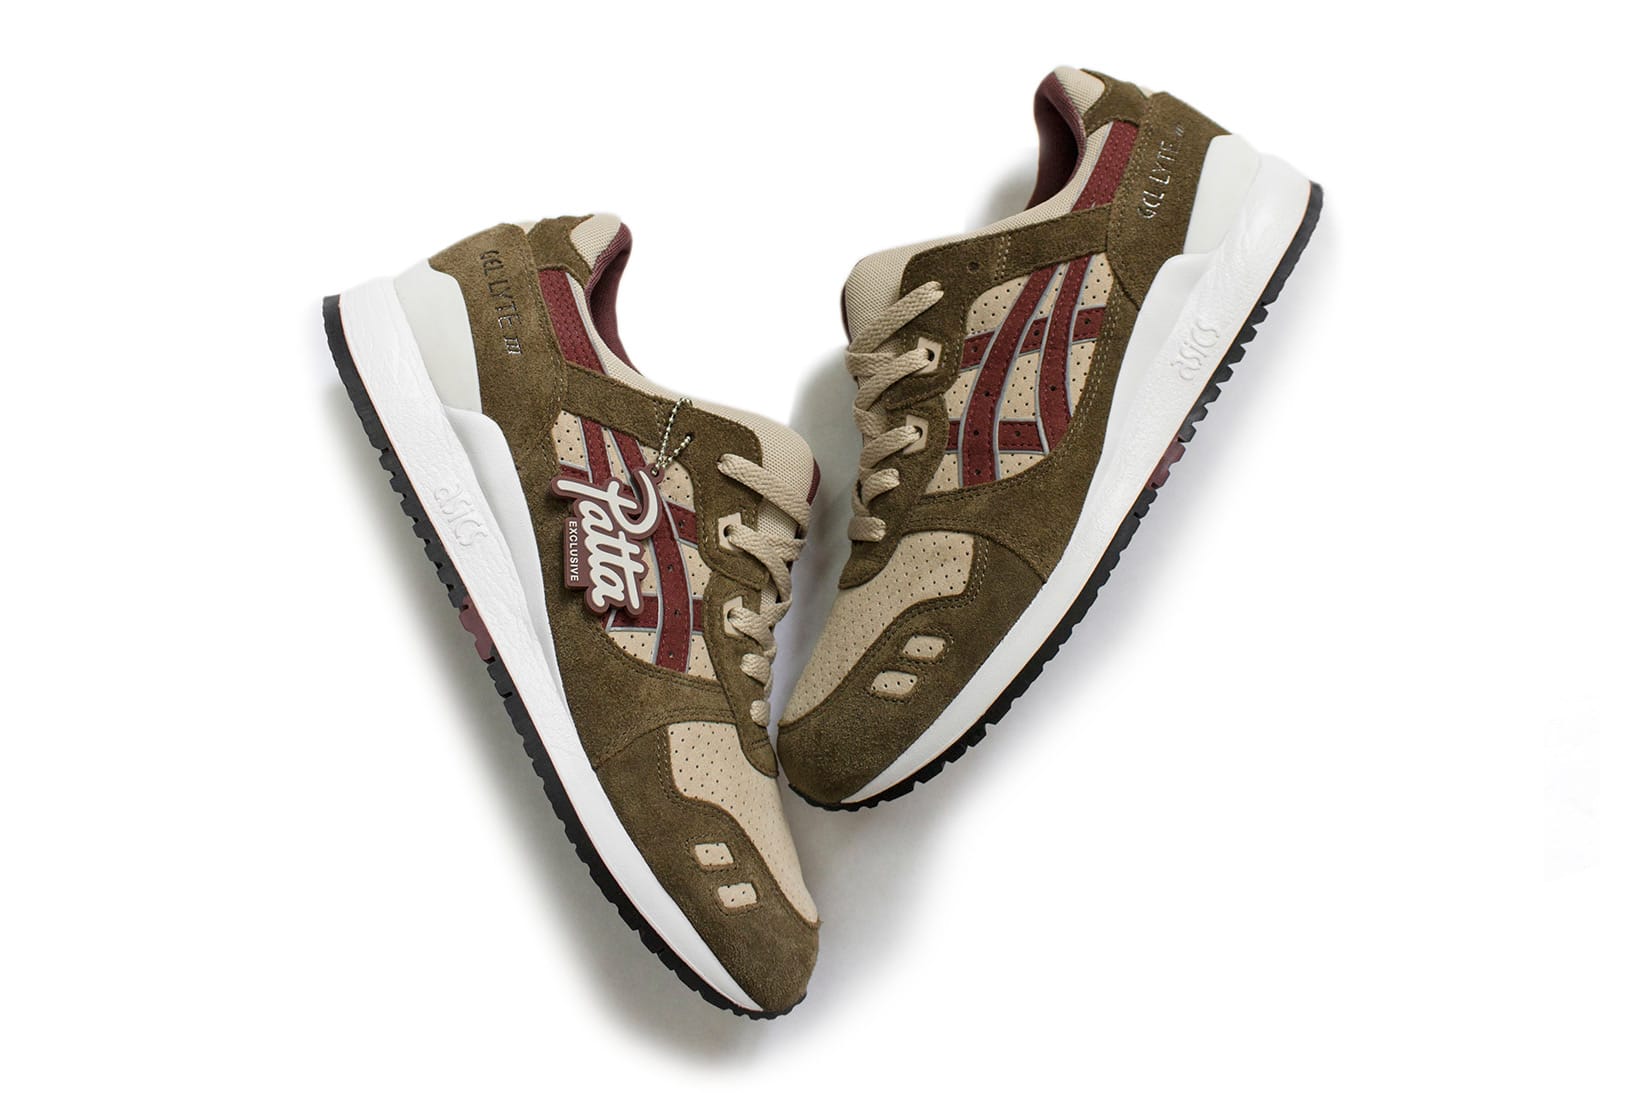 Patta and ASICS Gel Lyte III Exclusive 